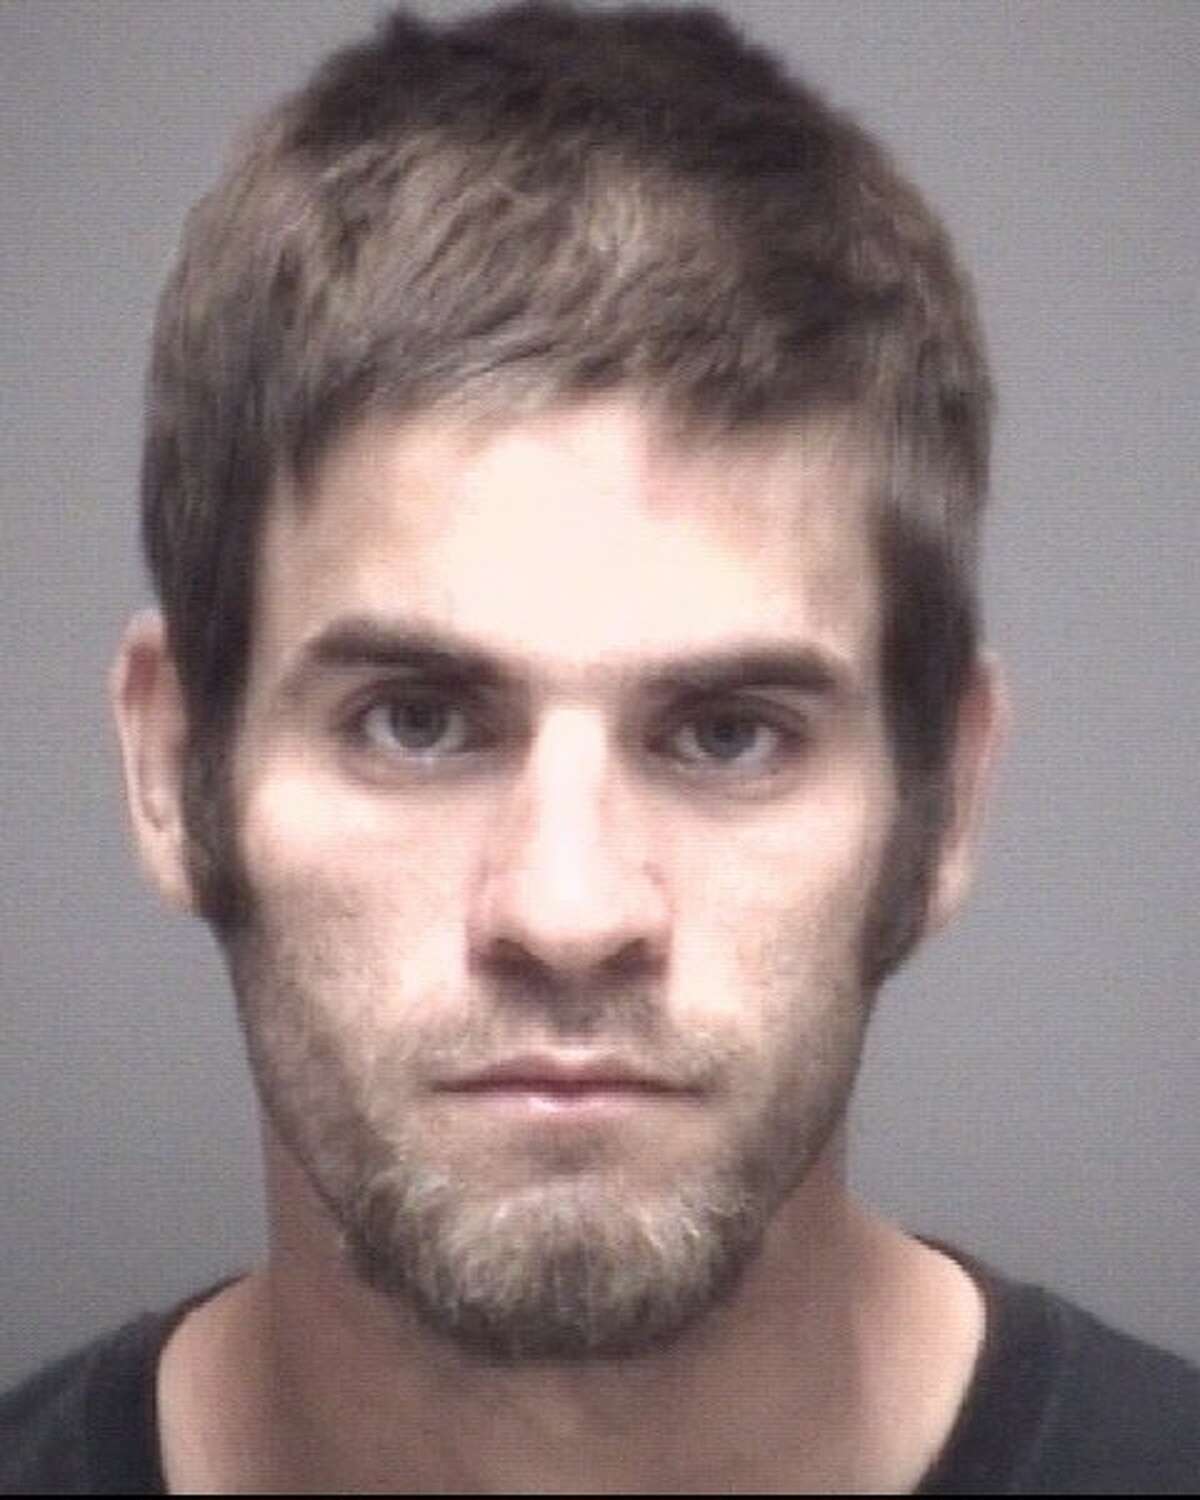 James Mize, 25, Jasper Warrant in Jasper County for possession of a controlled substance